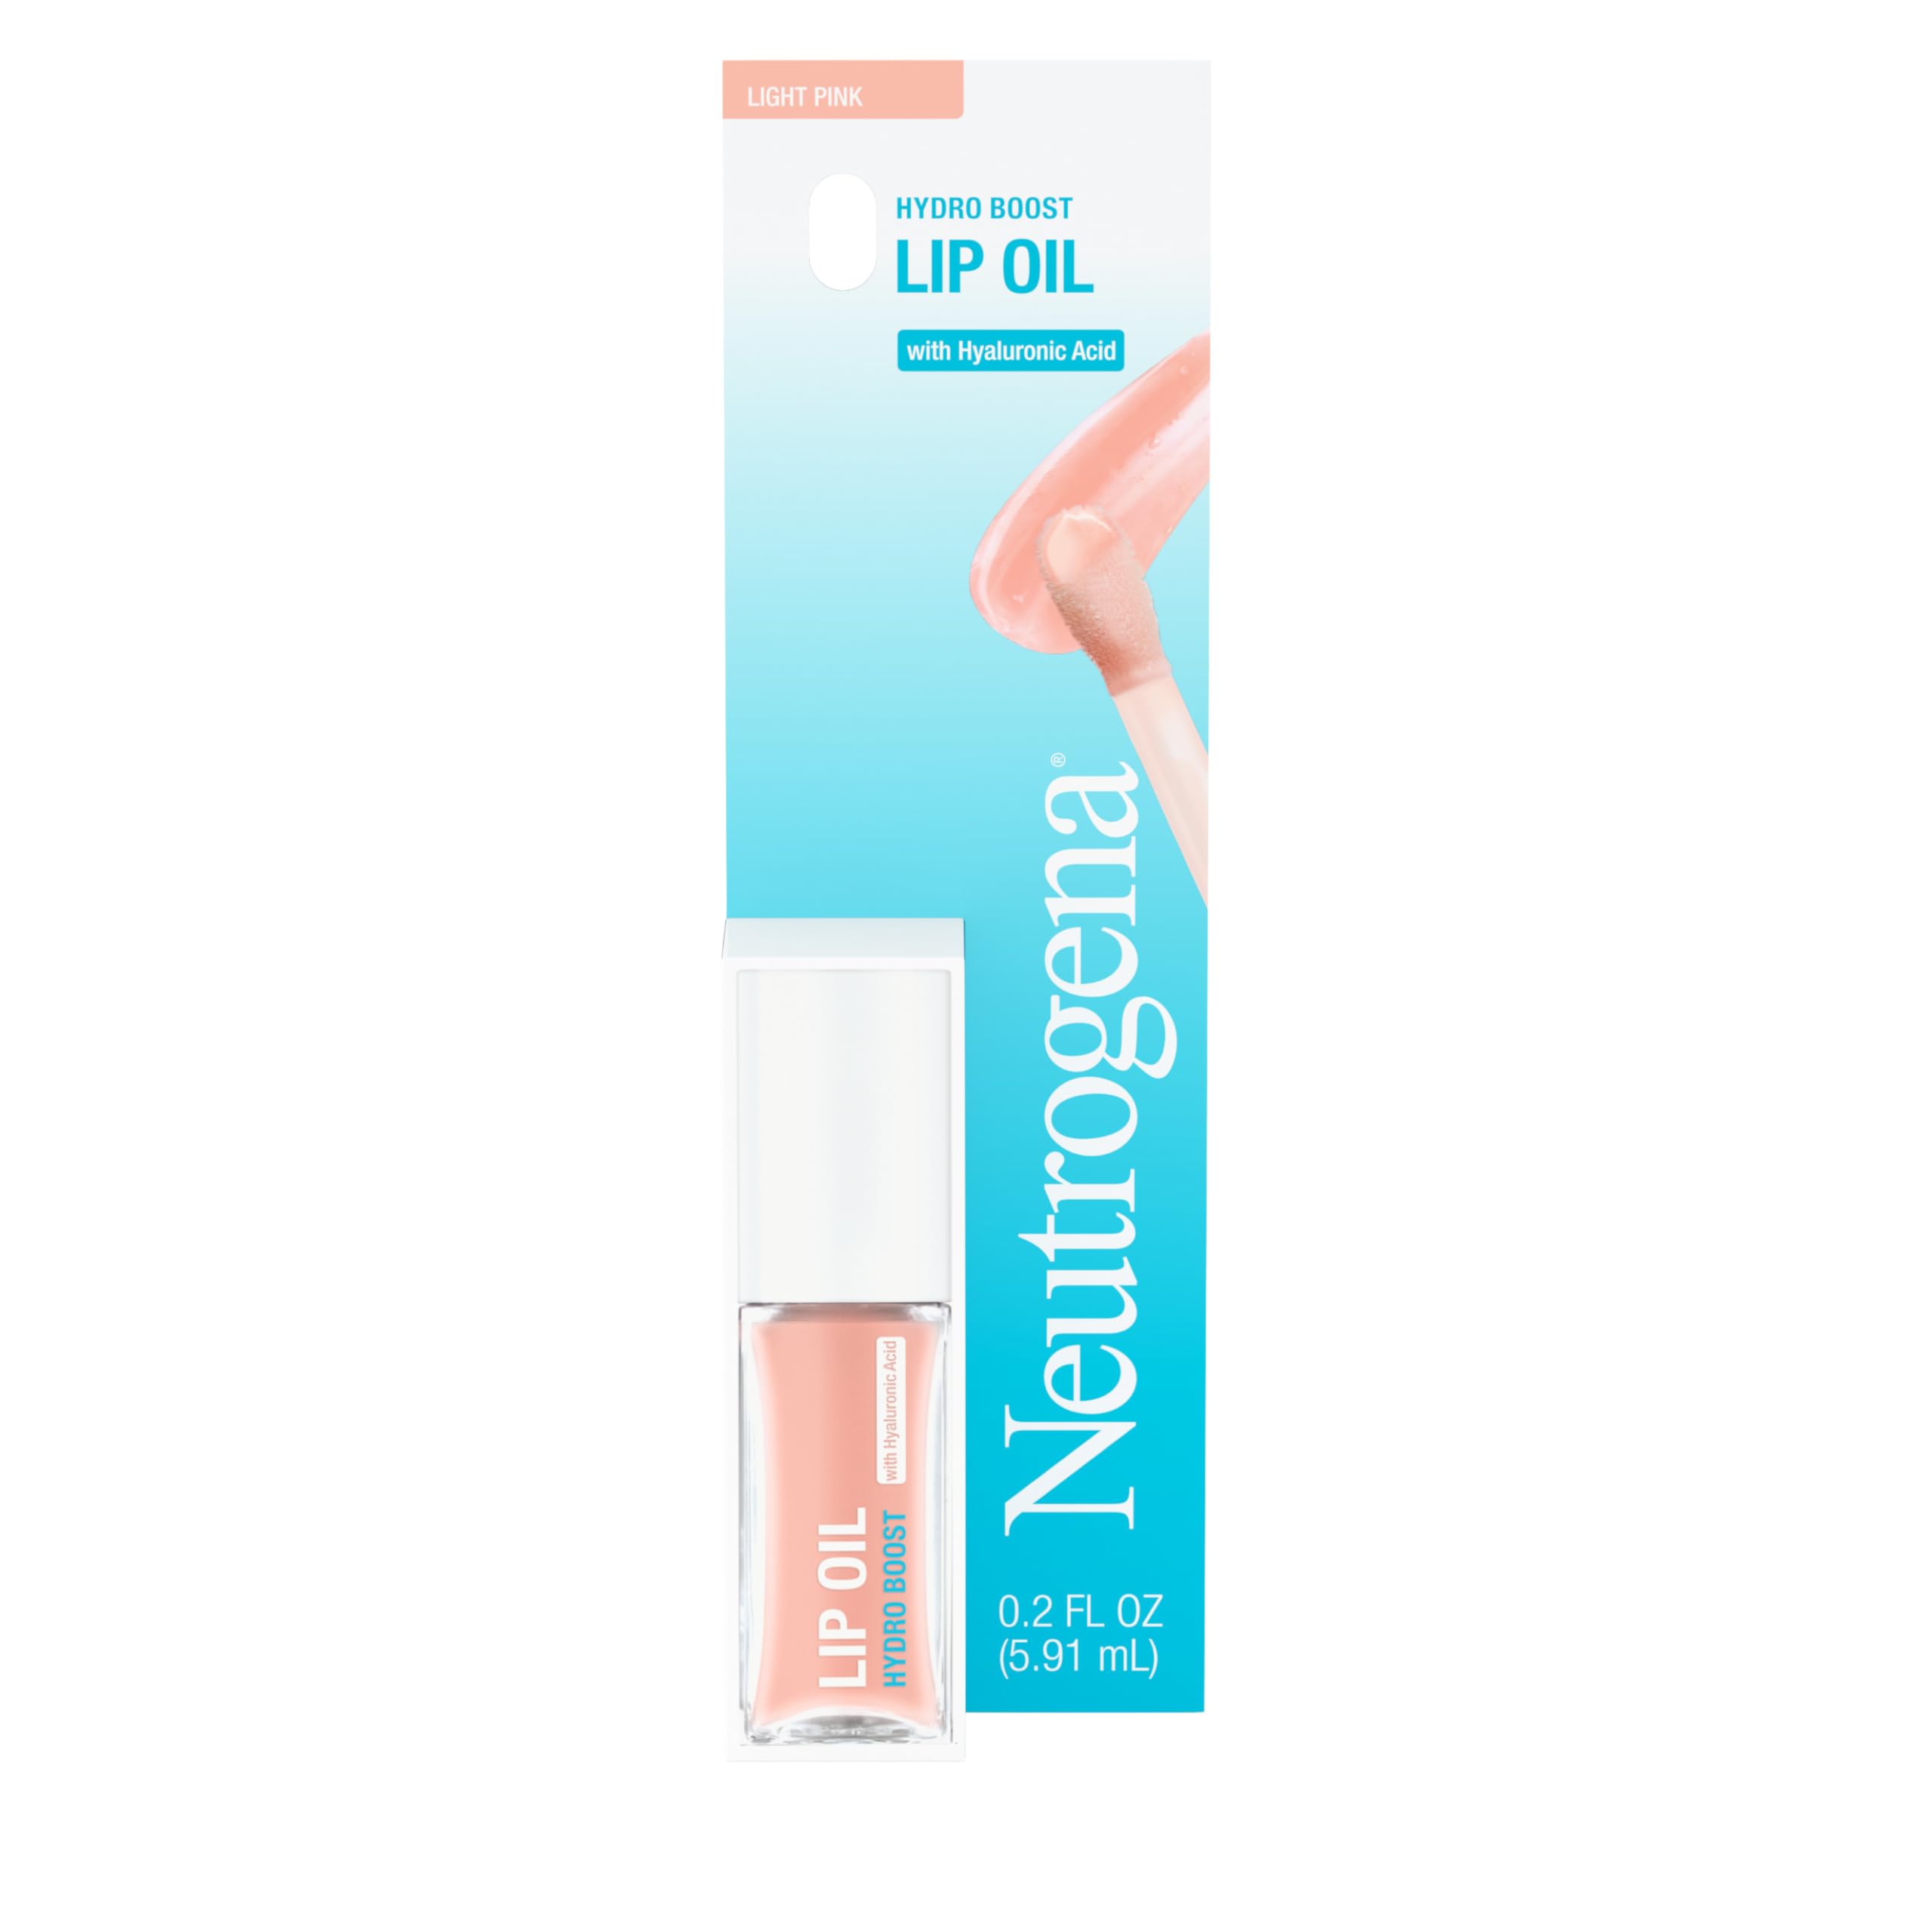 Neutrogena Hydro Boost Tinted Lip Oil with Hyaluronic Acid, glossy lip oil designed to hydrate & nourish lips while bringing out their natural color, Light Pink, 2 oz